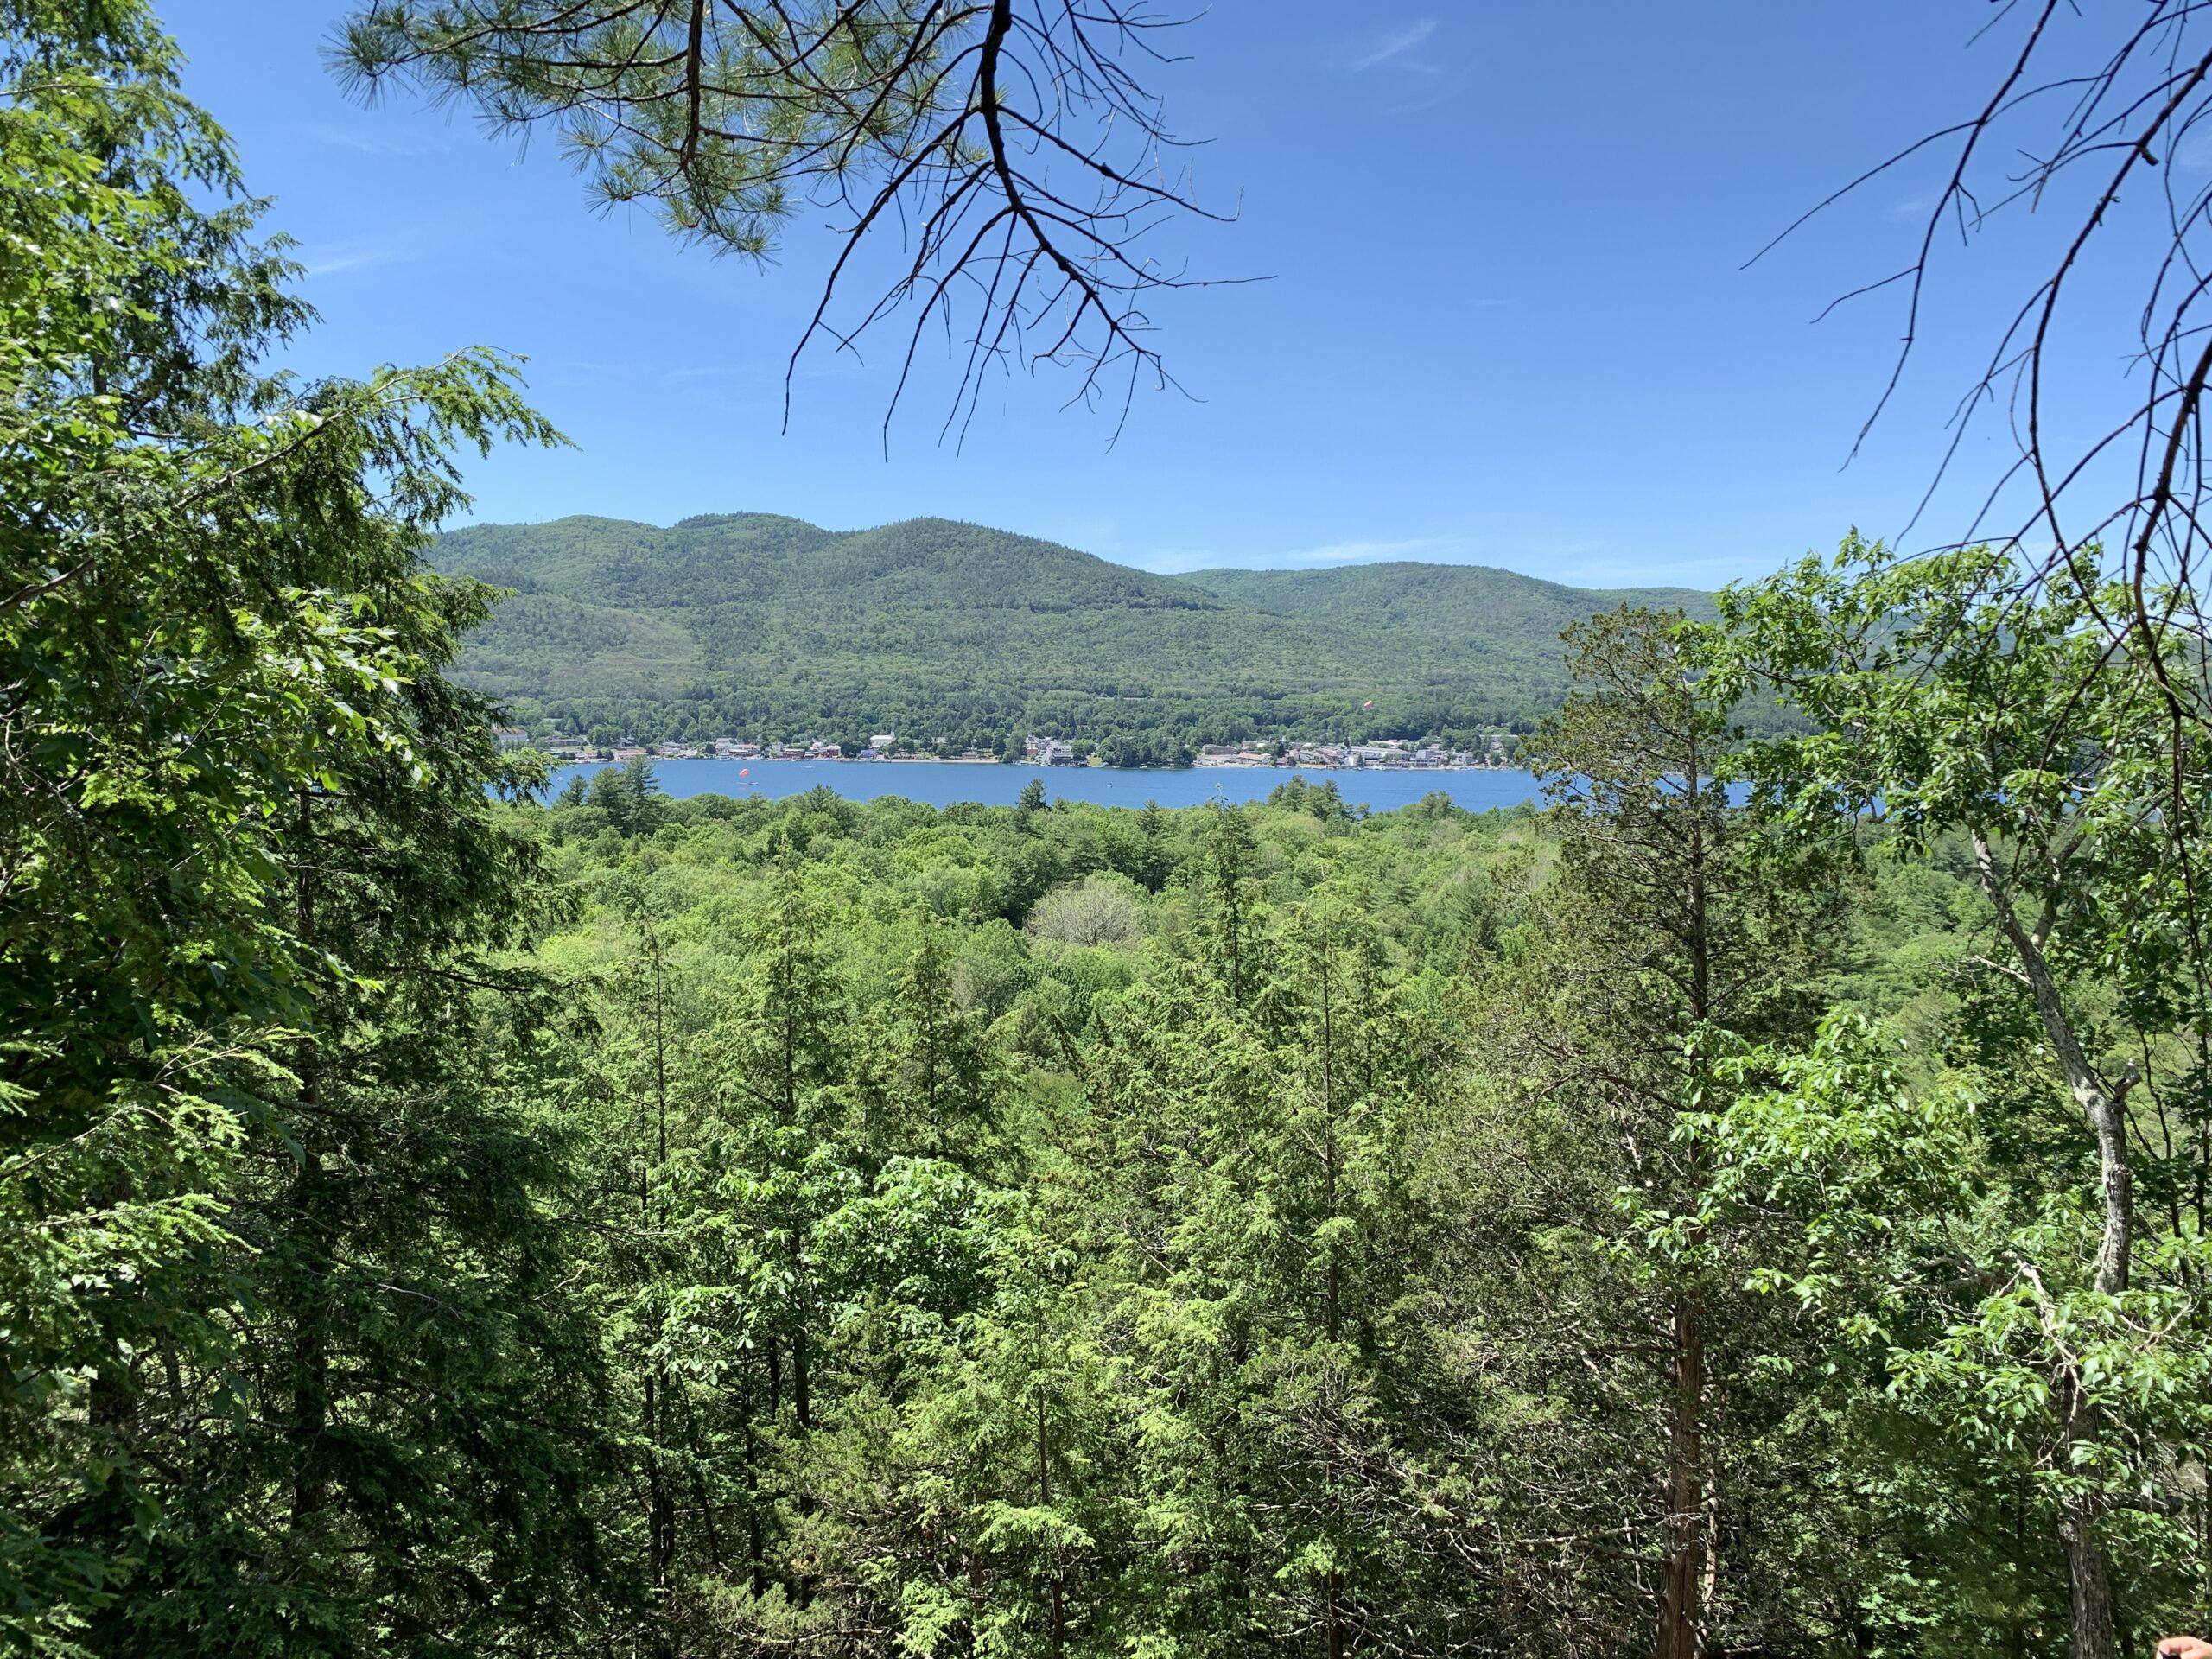 Wiawaka's Uplands provide a scenic view of Lake George